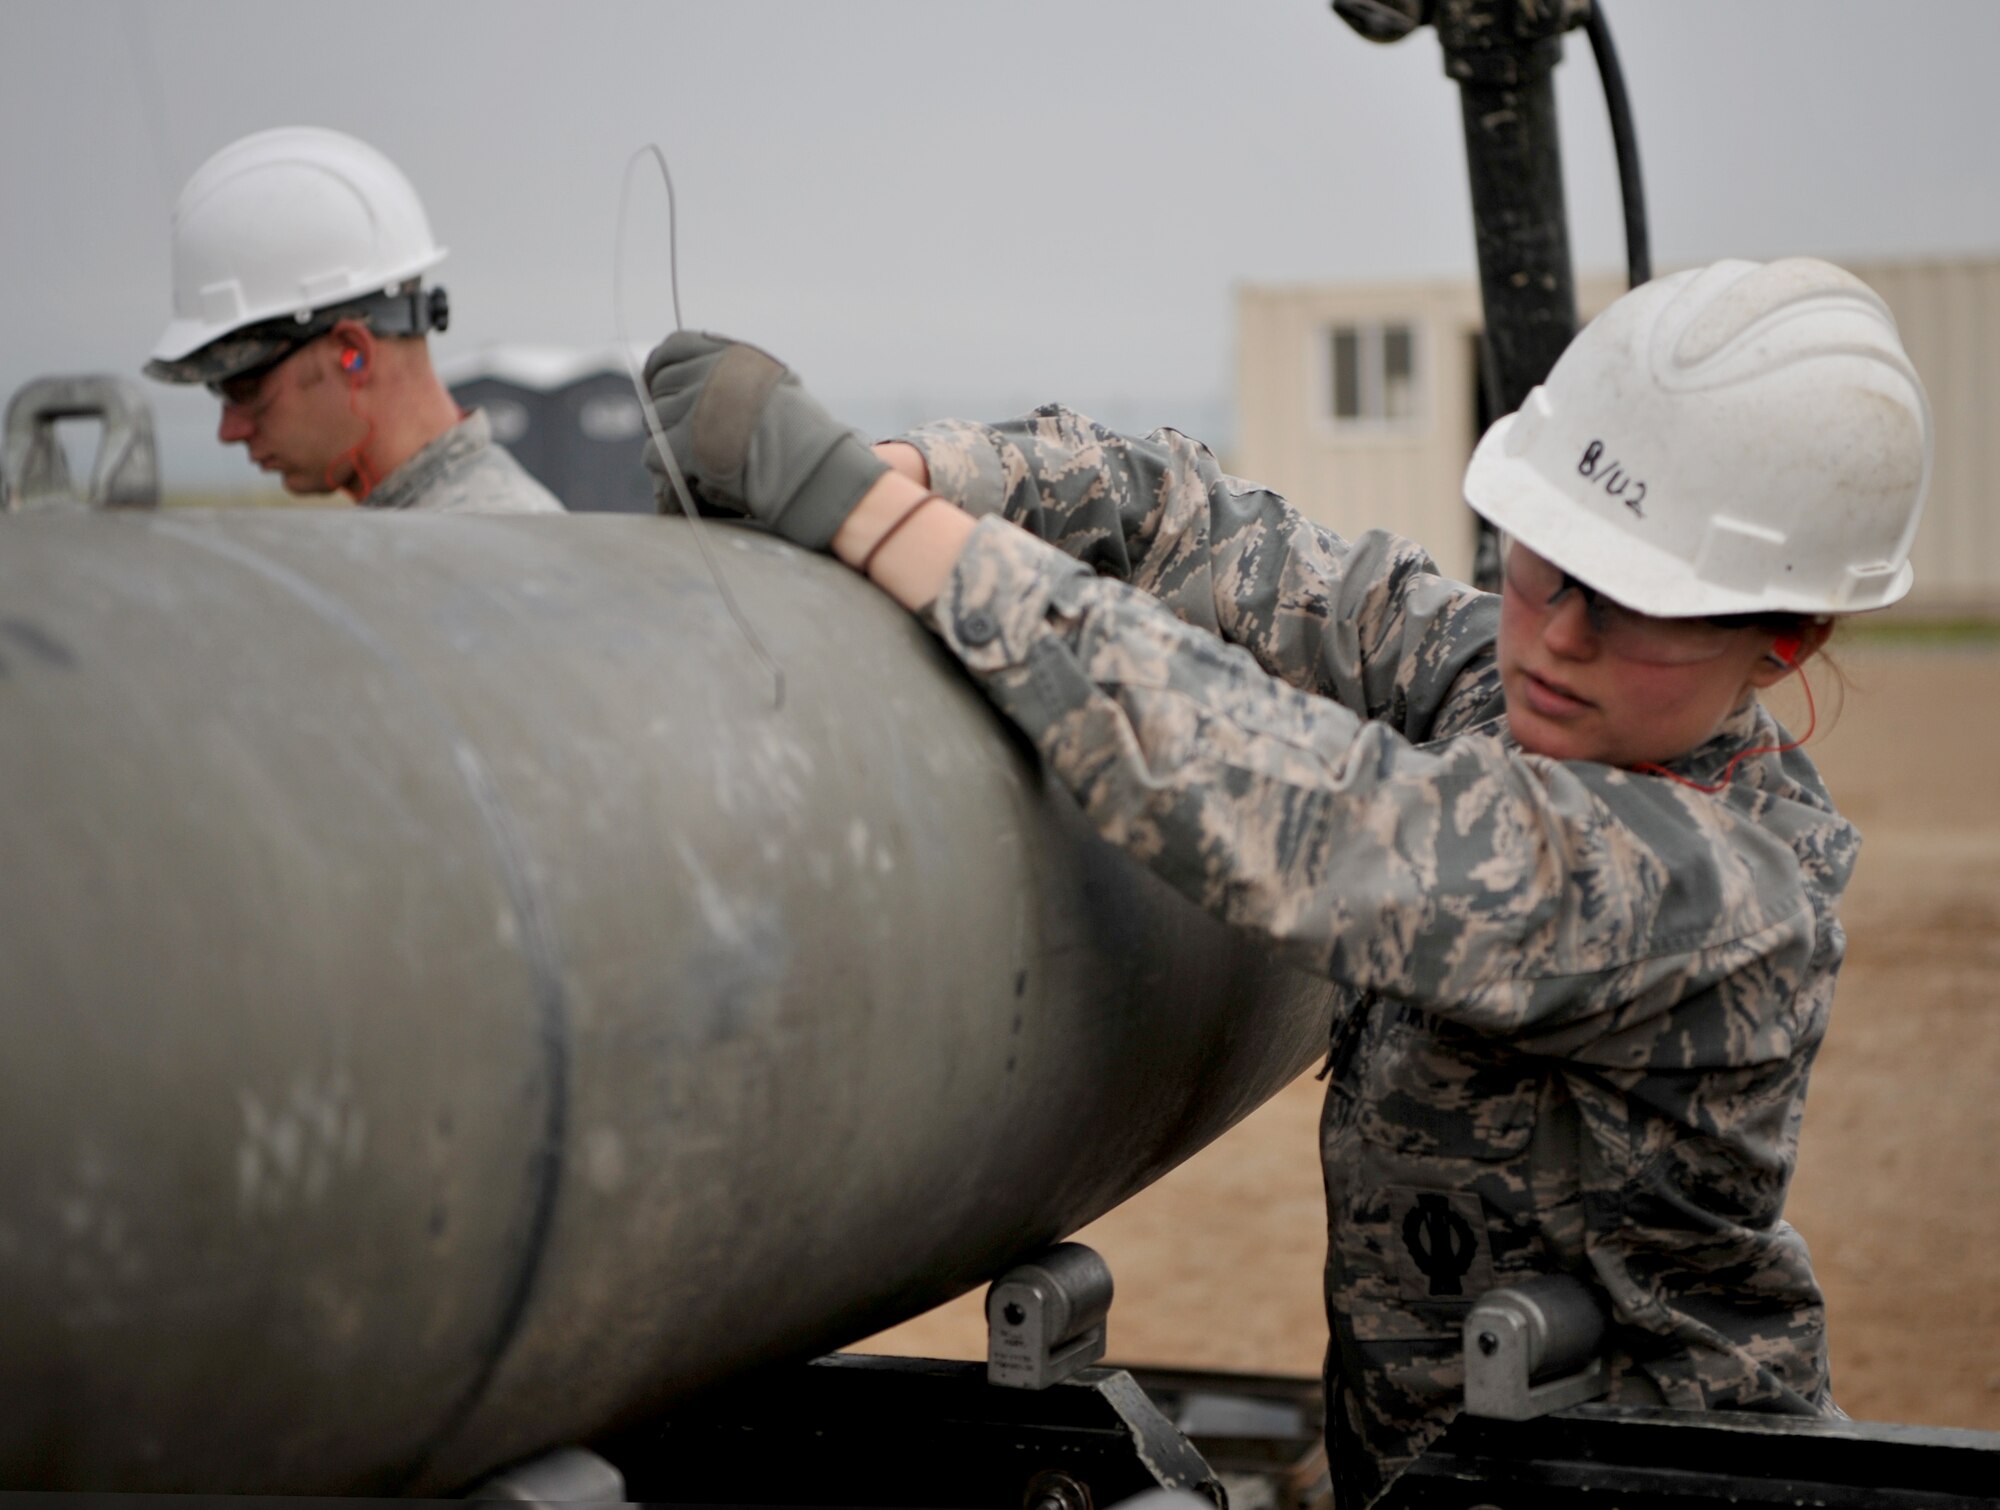 Airmen work together to build a munition at the munitions pad Dec. 13, 2016, at Beale Air Force Base, California. The Airmen are currently in a munitions career field upgrade training course at the Air Force Combat Ammunition Center. (U.S. Air Force photo/Staff Sgt. Jeffrey Schultze)